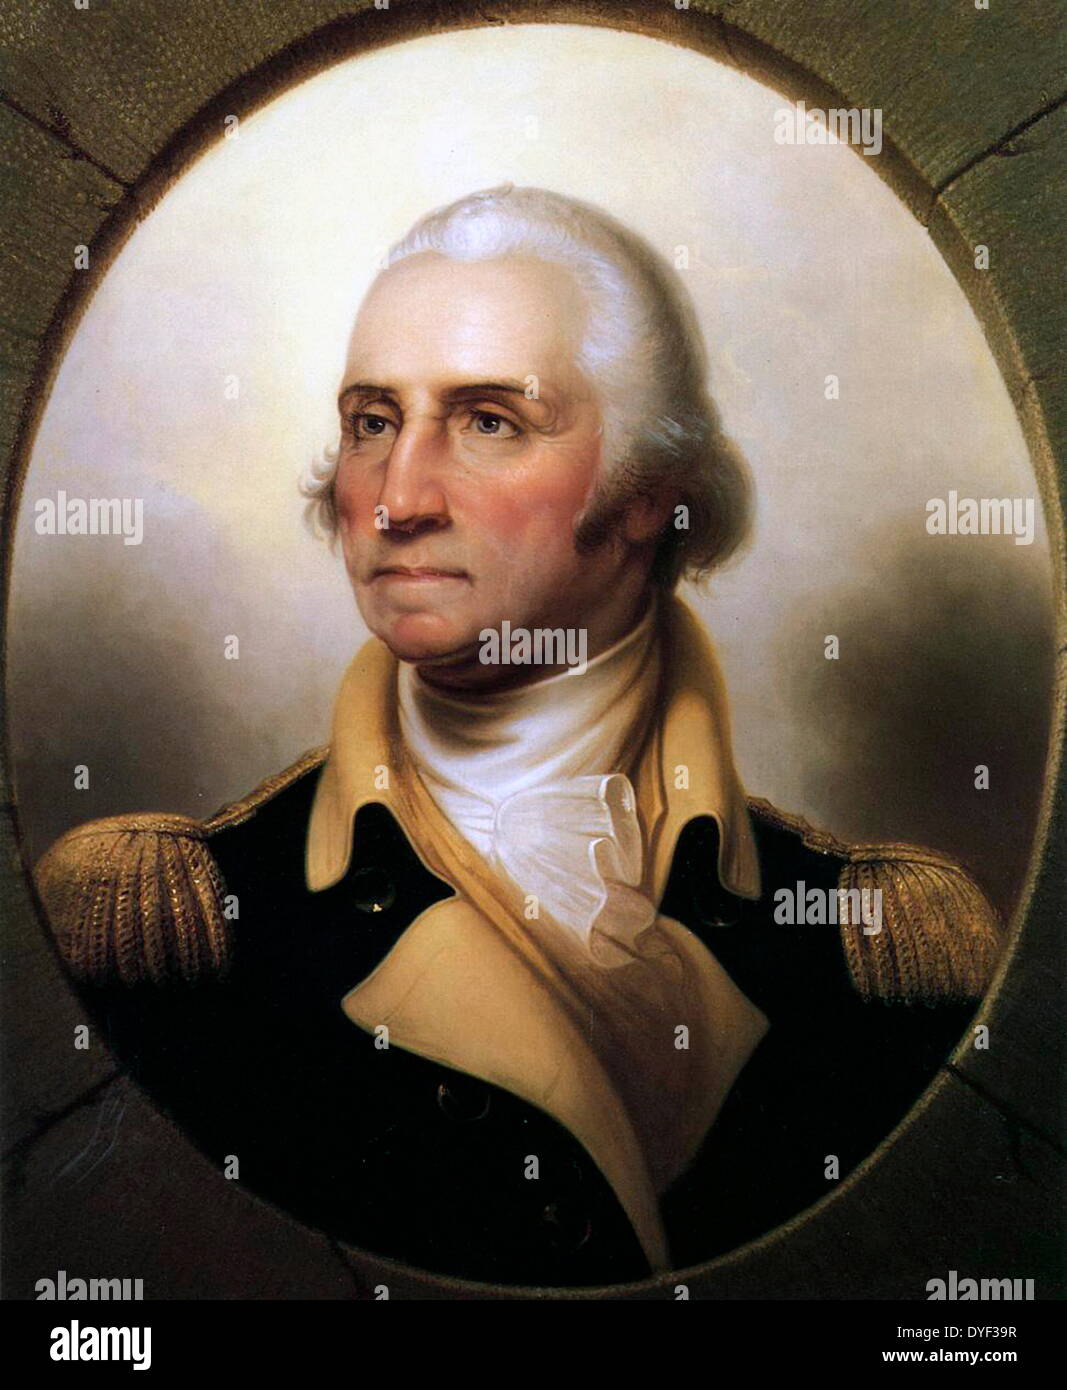 Portrait of President George Washington 1790. First President of the United States of America and Commander-in-Chief of the Continental Army during the American Revolutionary War. Painted in Neoclassical style. Rembrandt Peale Stock Photo